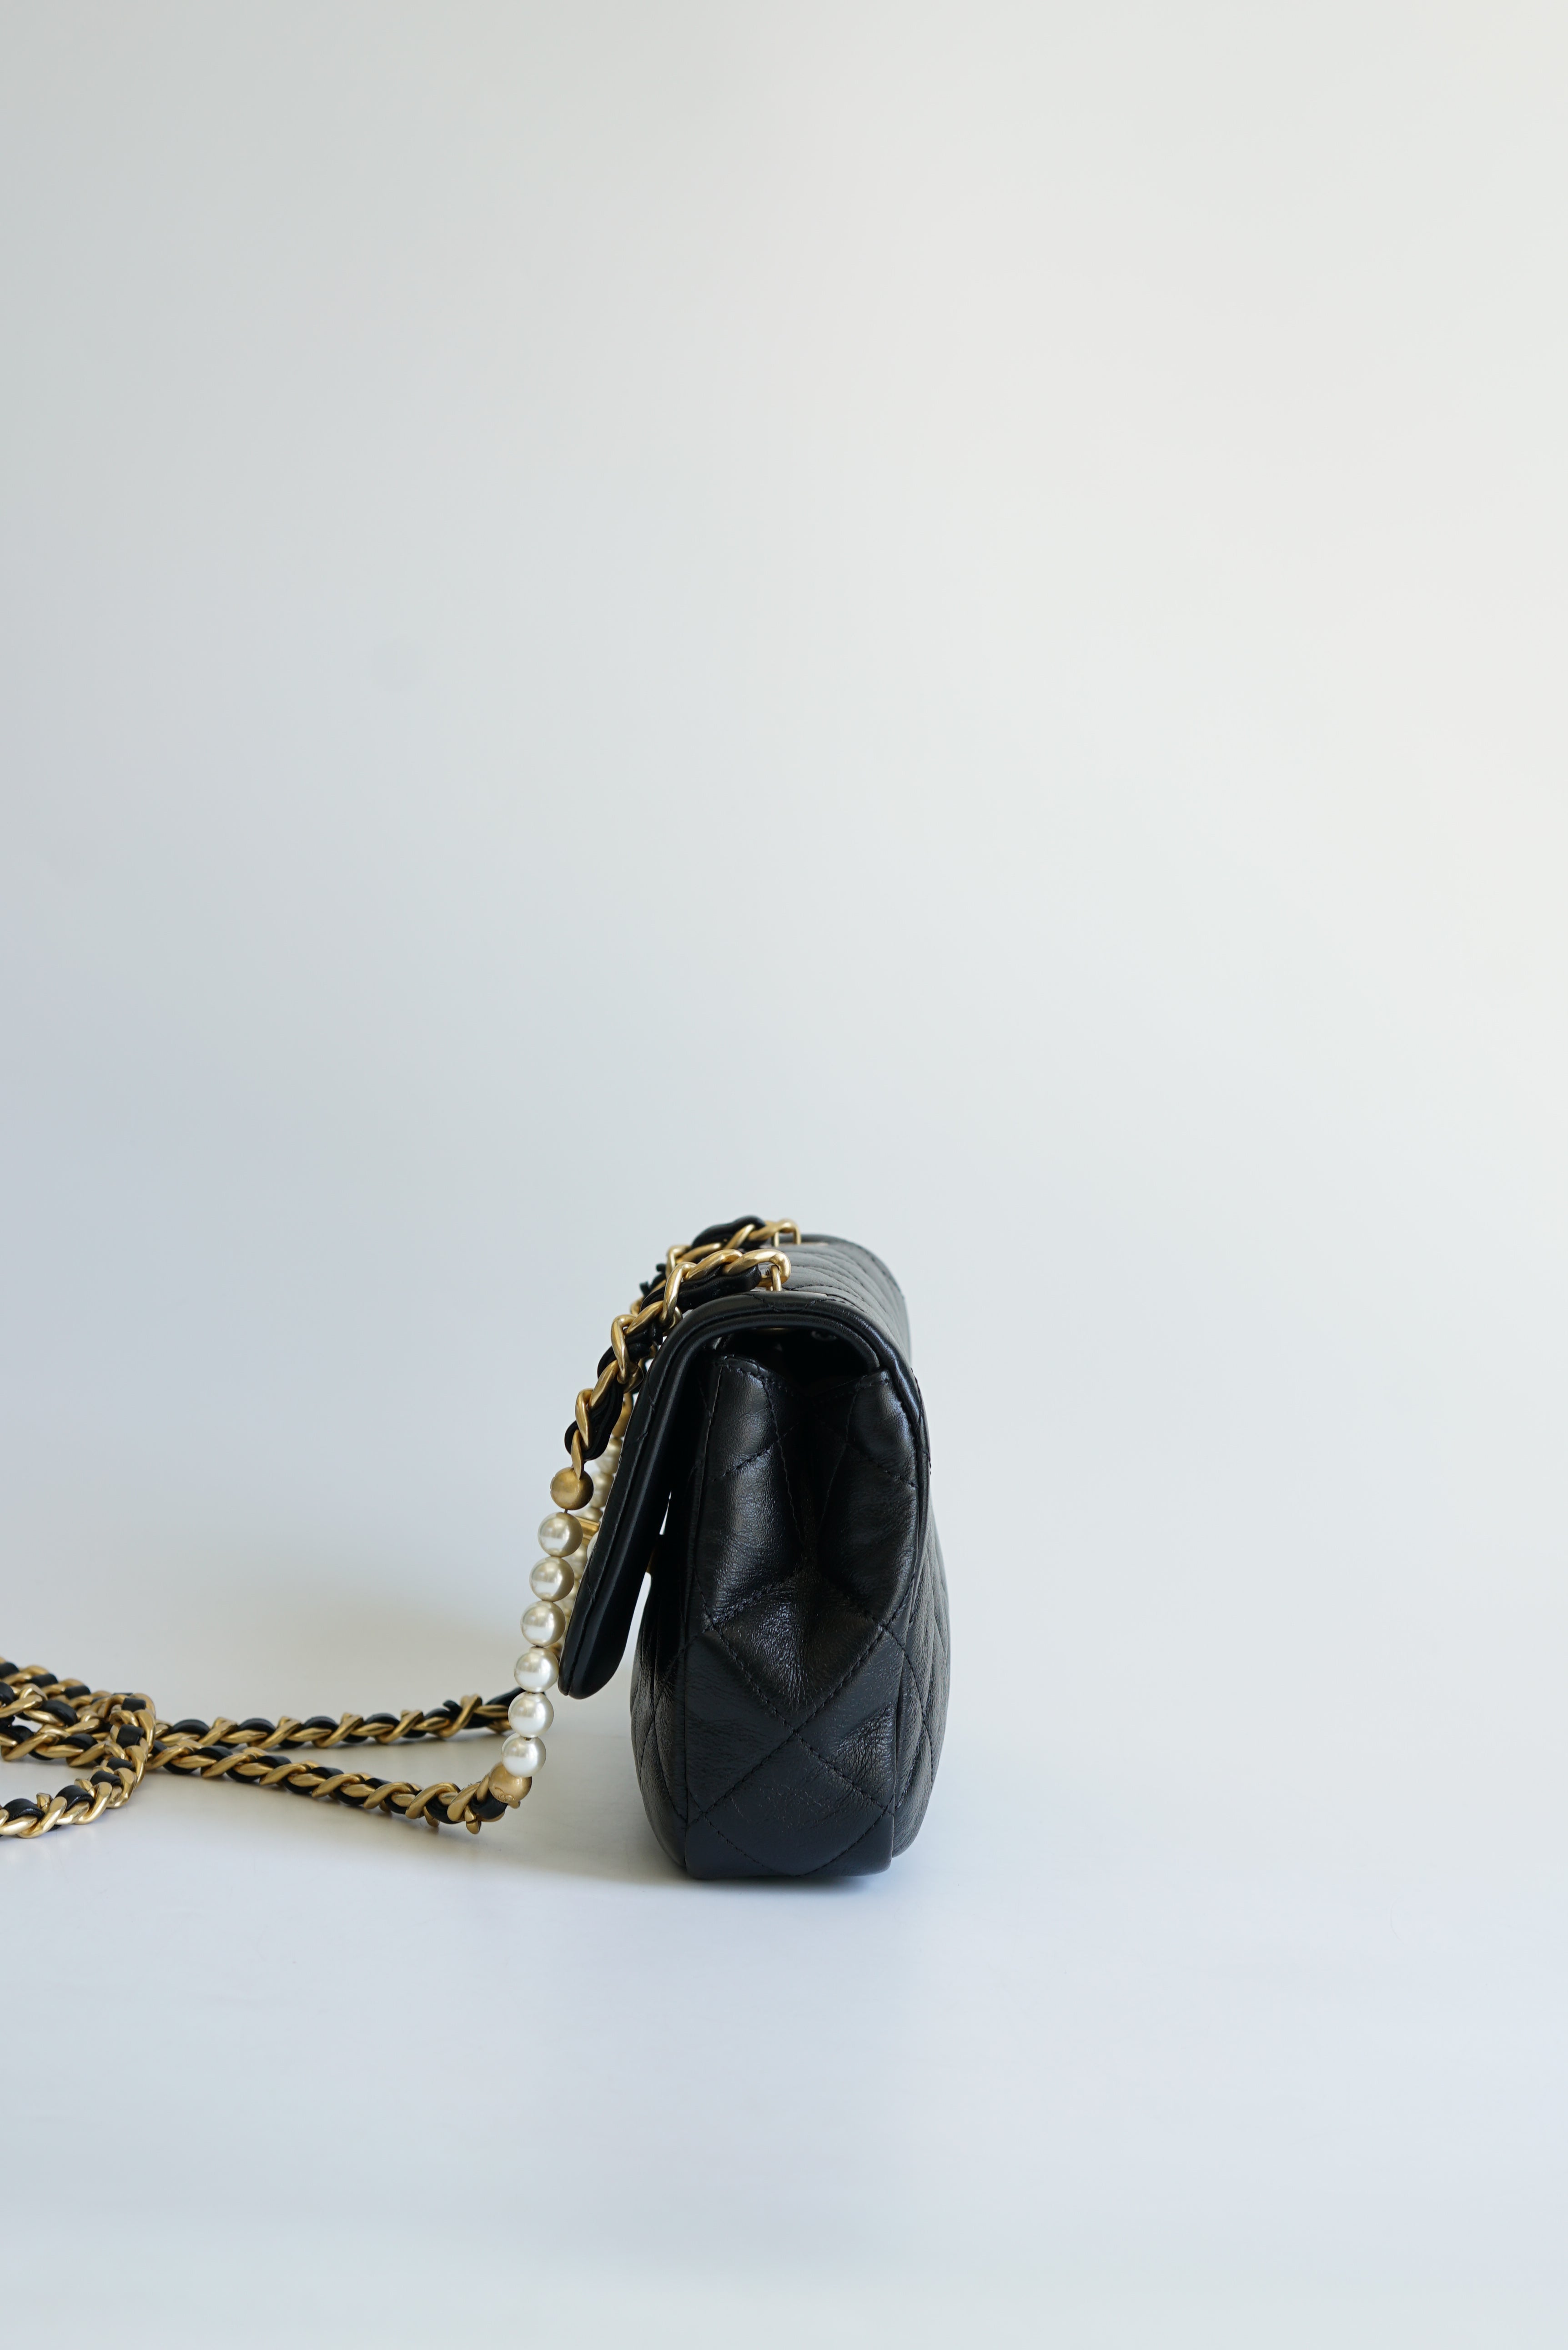 Chanel Seasonal Mini Flap Pearl CC and Chain in Black Calfskin and Aged Gold Hardware (Microchip)